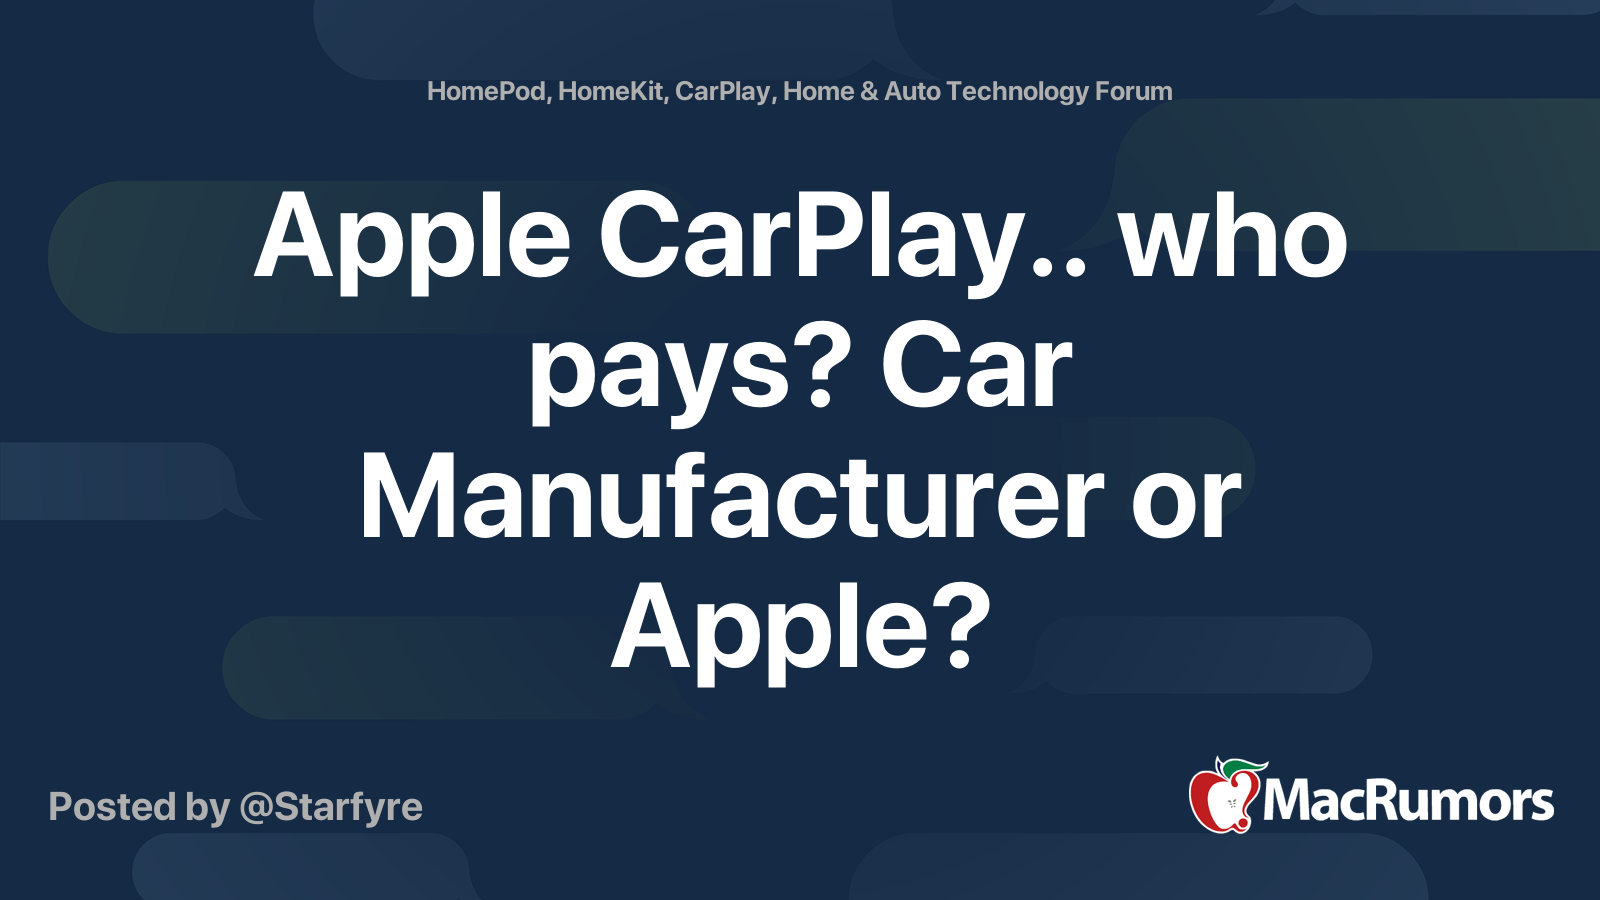 BMW and Apple CarPlay: Carmaker wants to charge for subscription - CNET